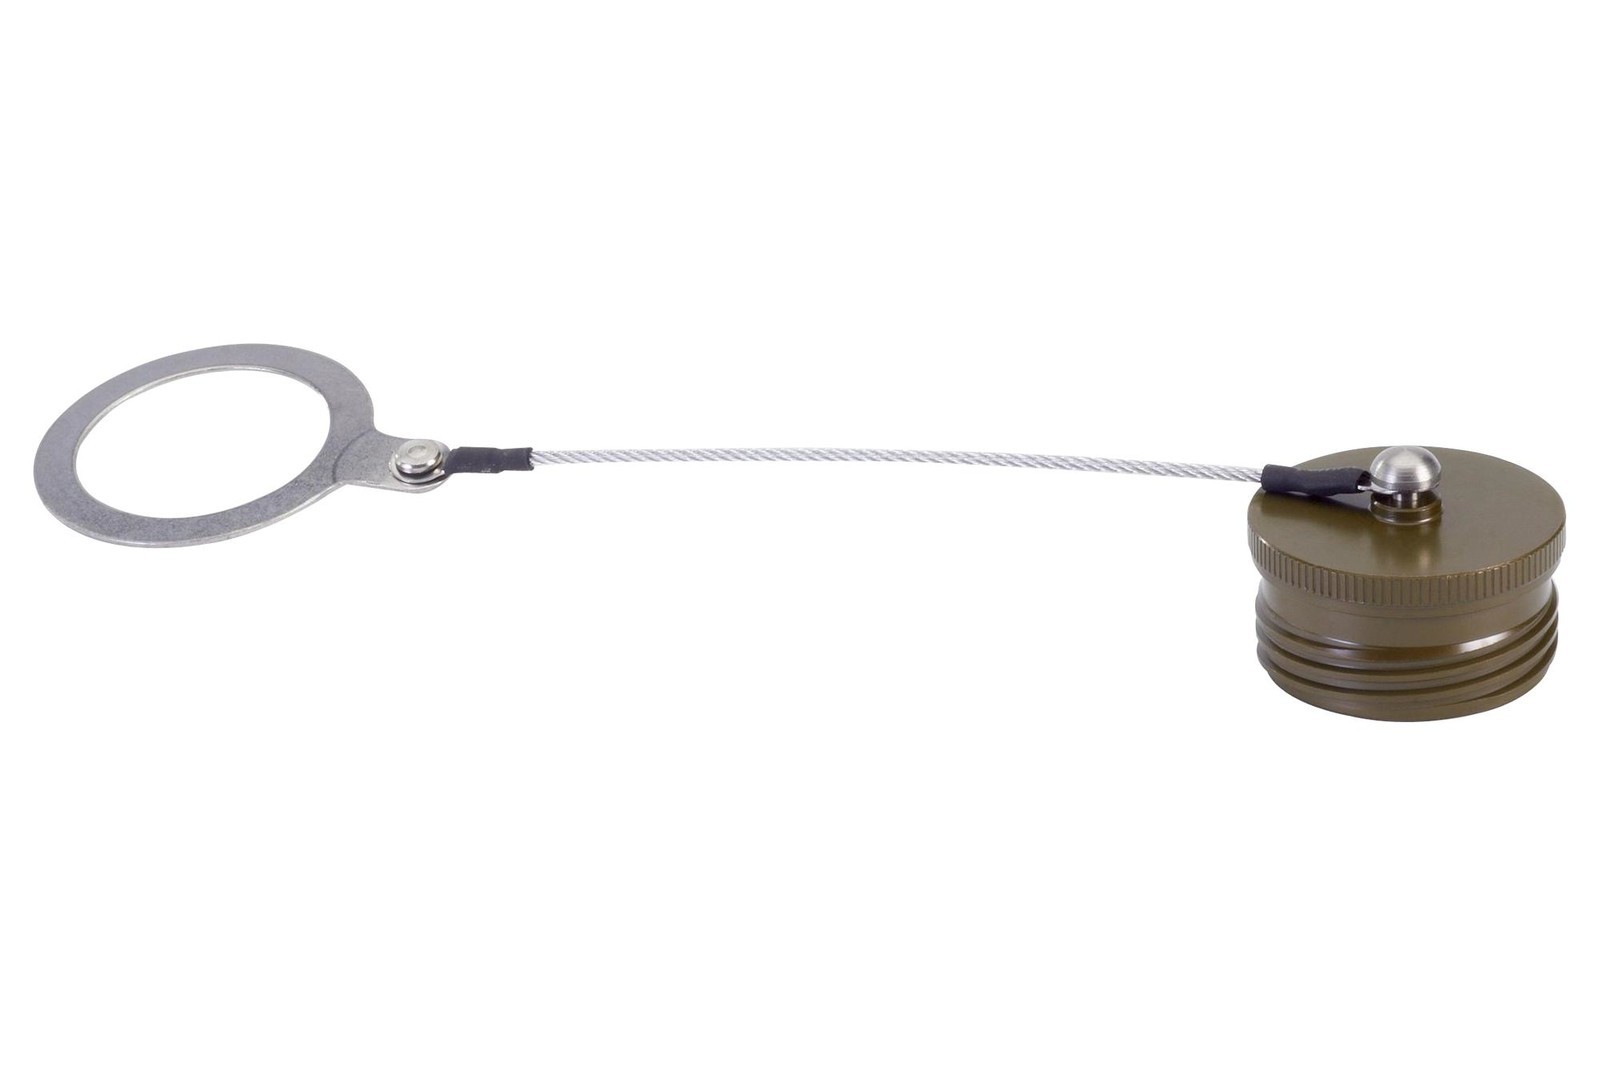 Amphenol Pcd D38999/33W23N Dust Cap W/rope And Ring, Shell Size 23